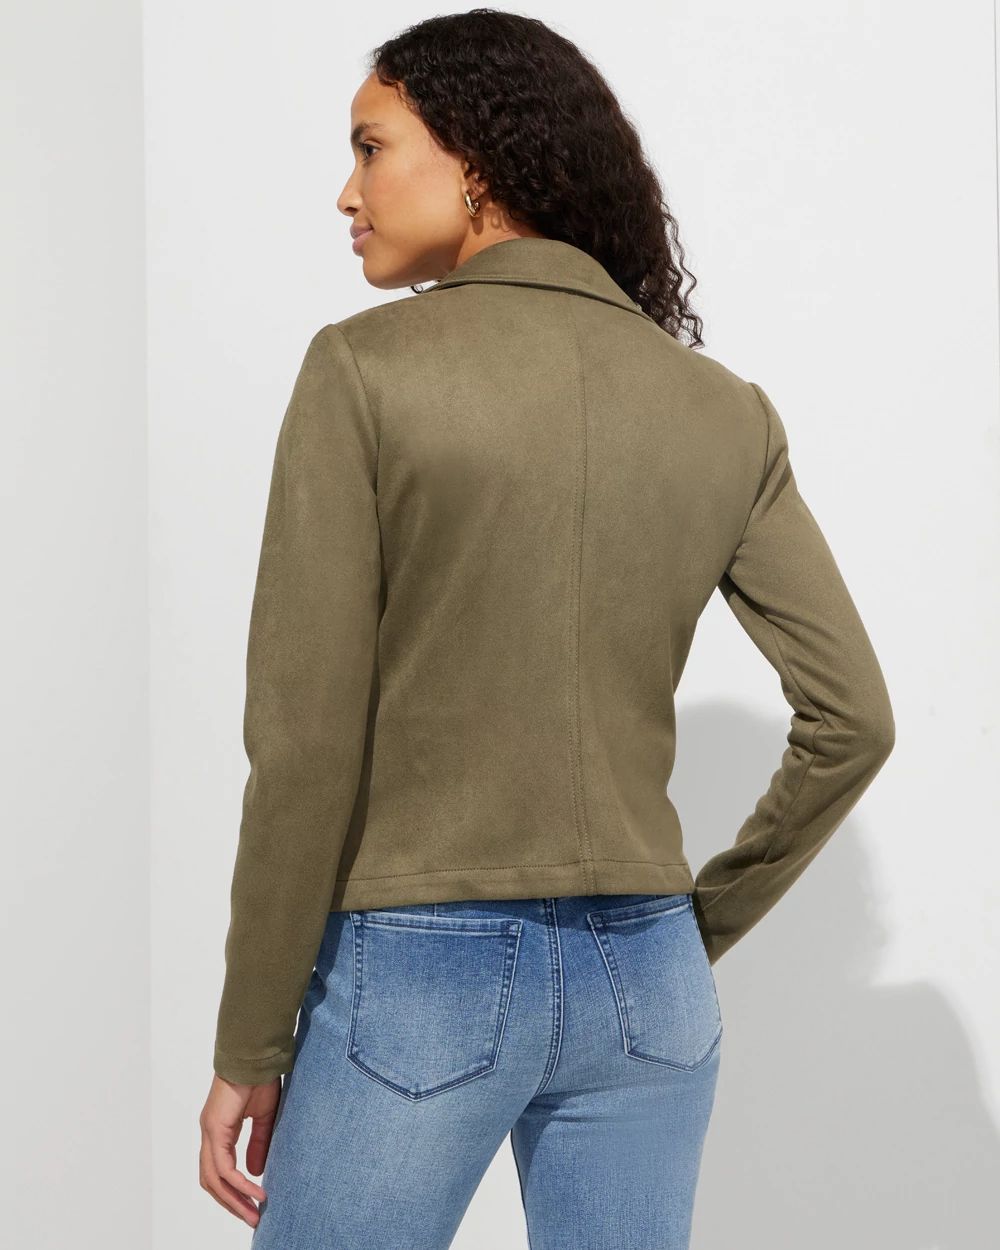 Outlet WHBM Long Sleeve Faux Suede Moto click to view larger image.